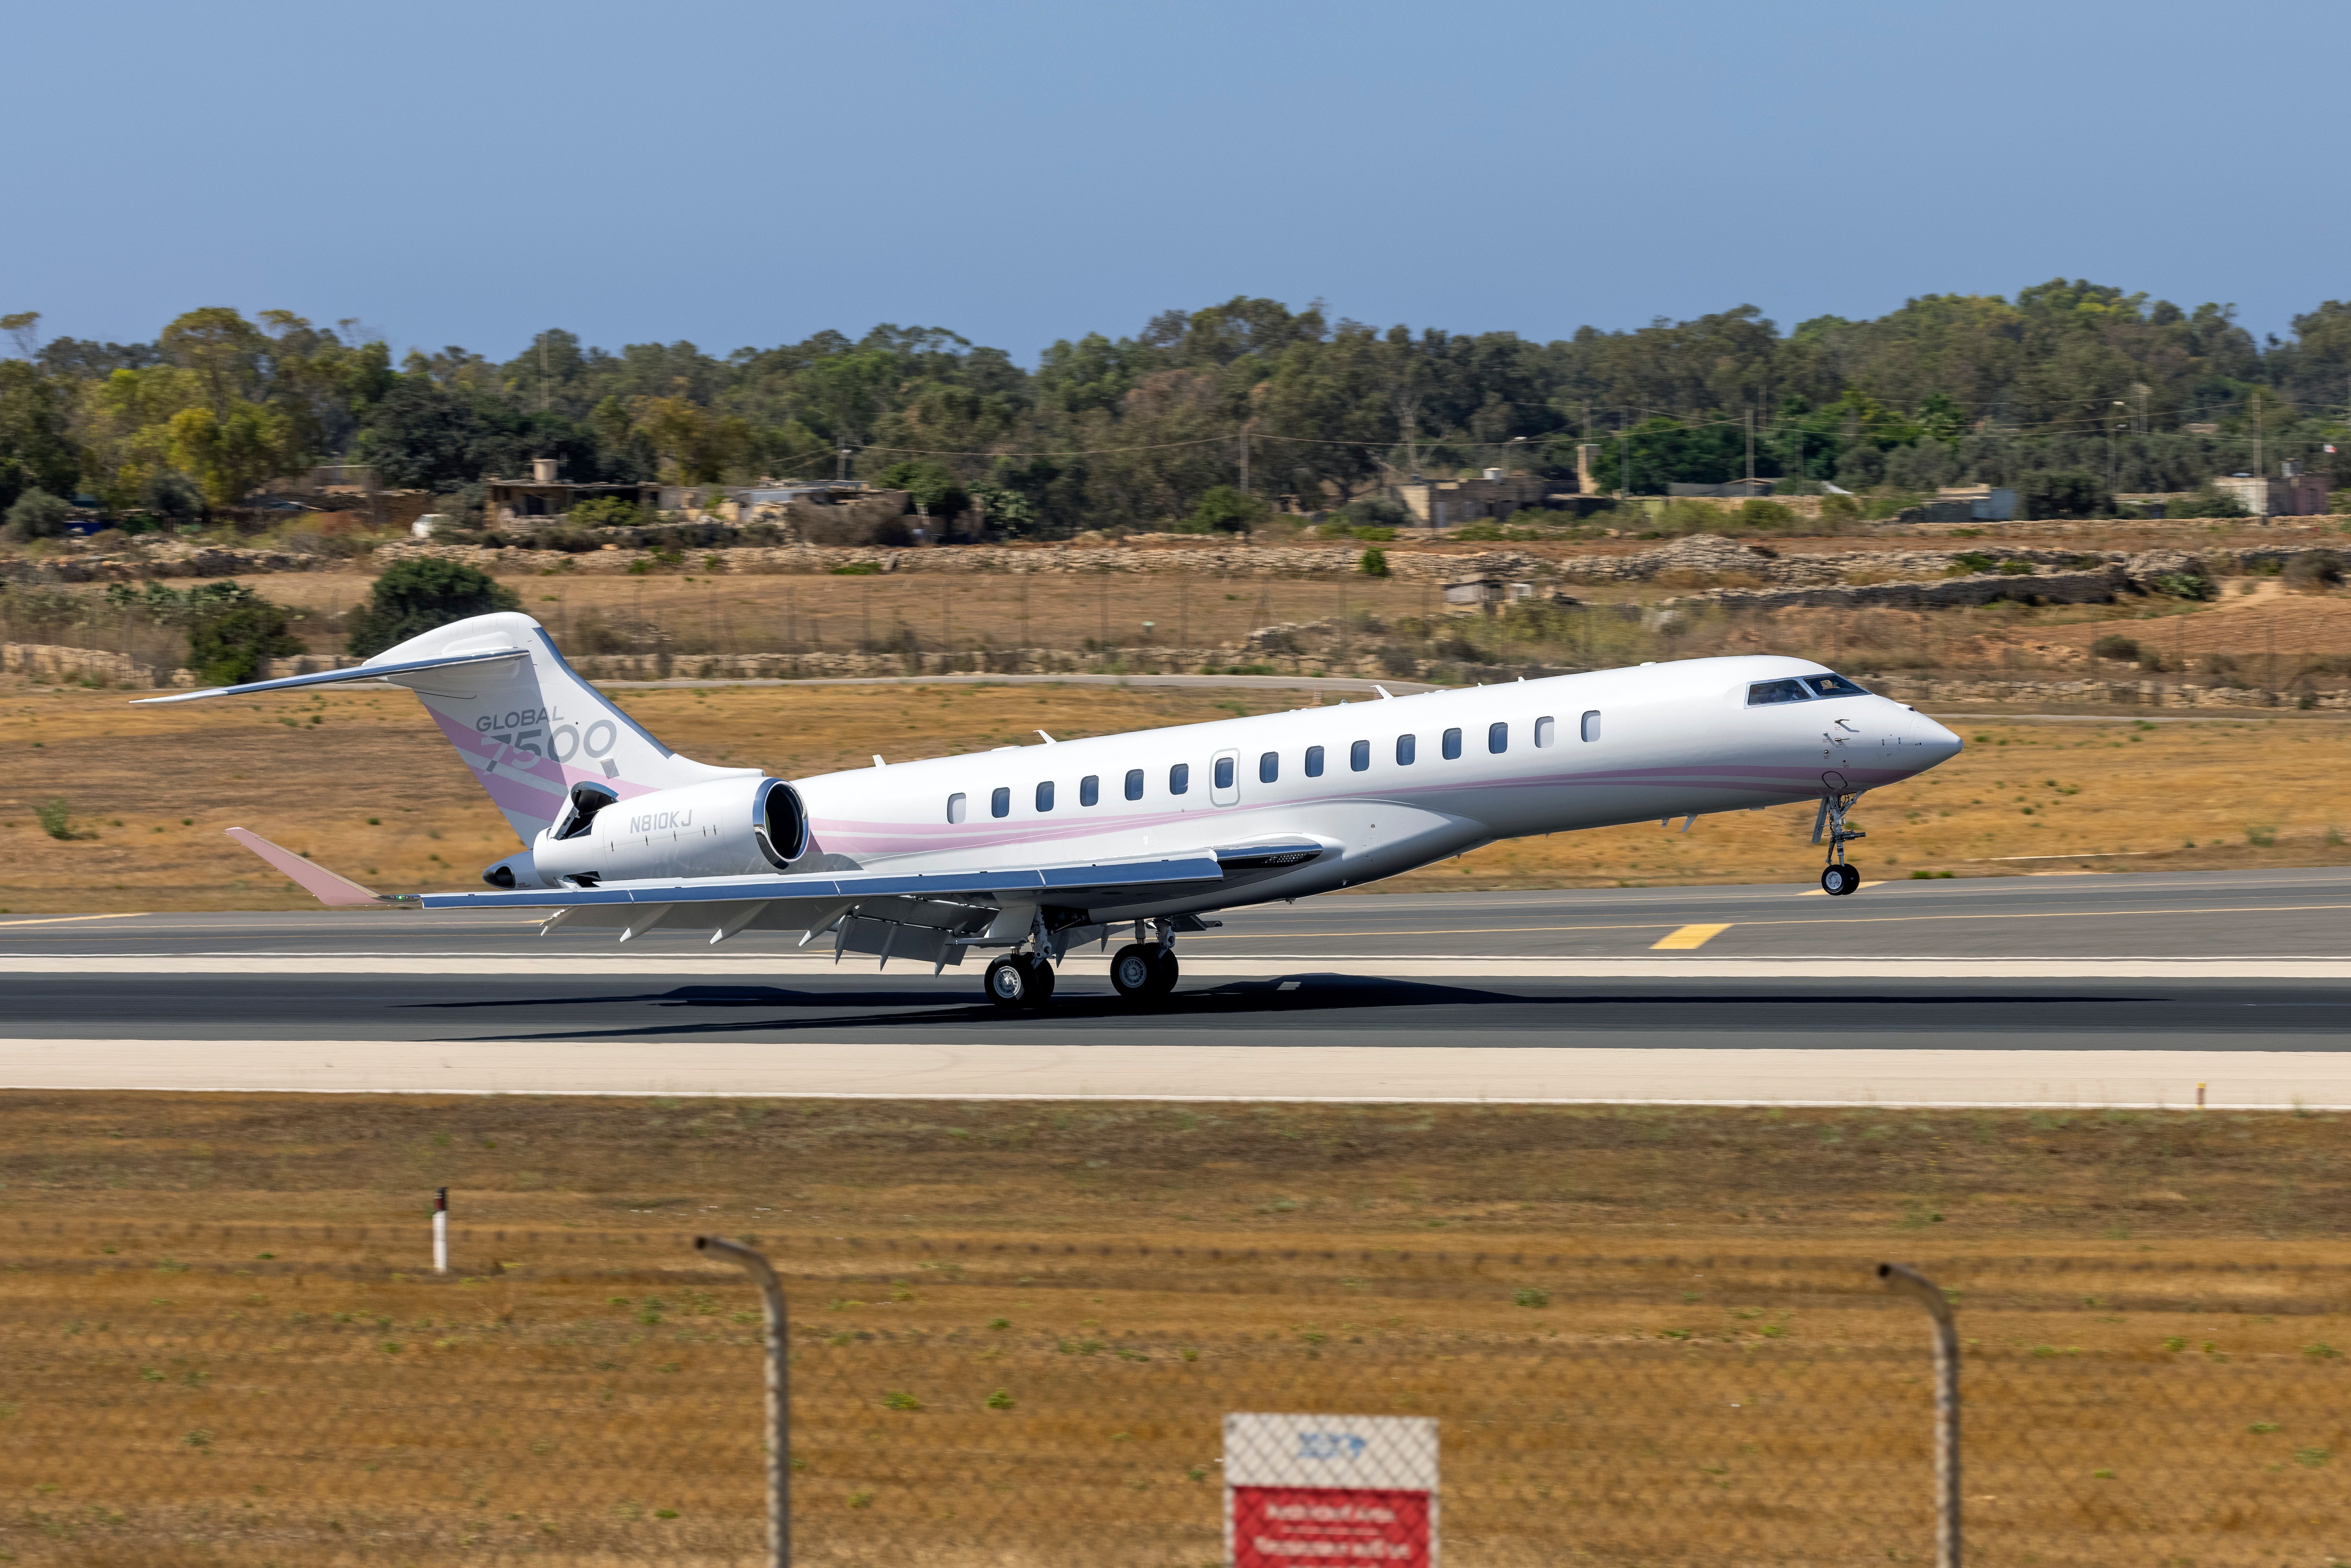 Kylie Jenner's Bombardier Global 7500 taking off.